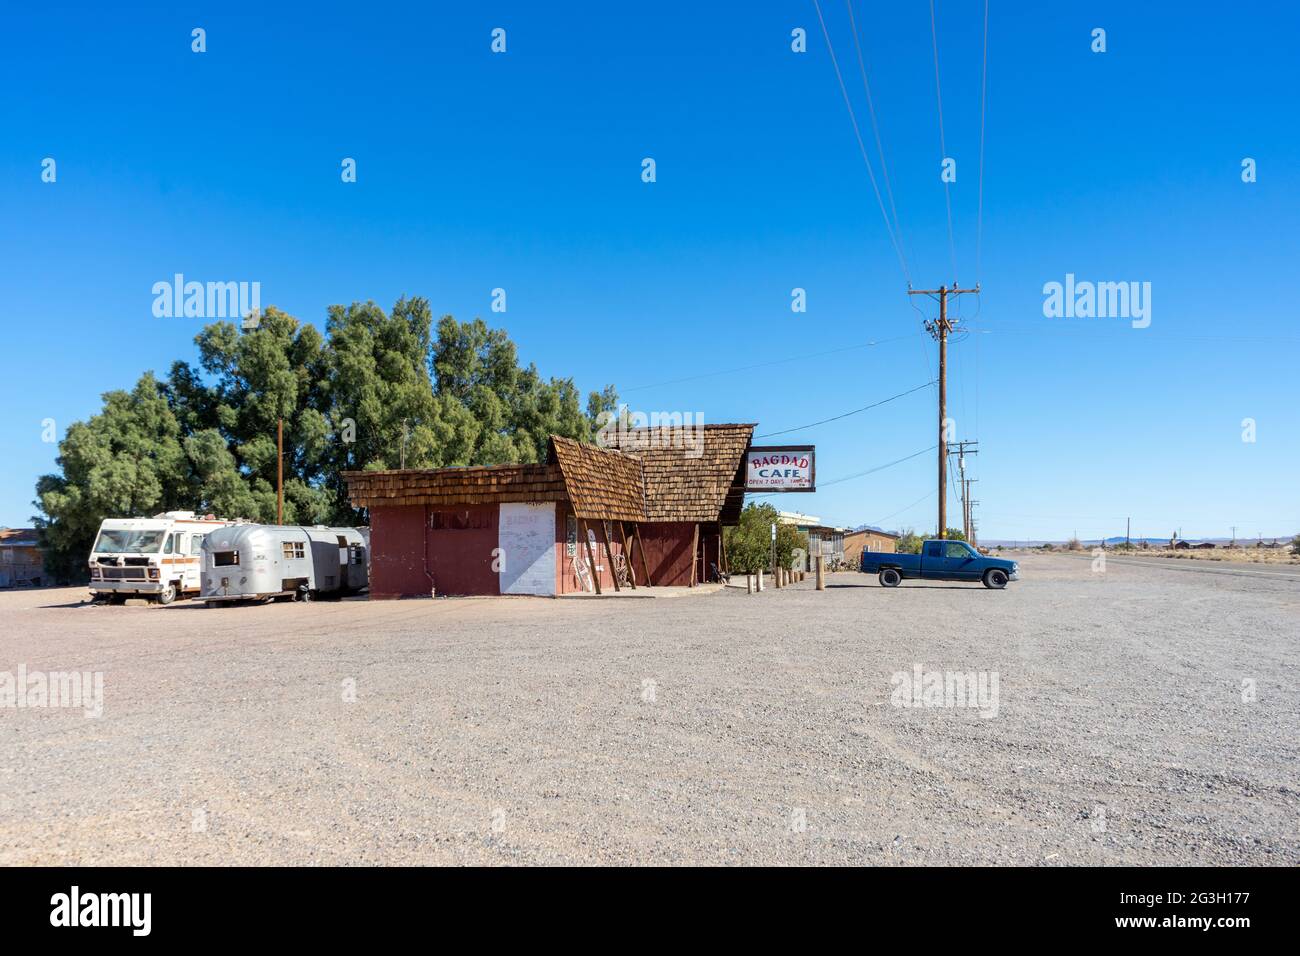 Newberry Springs, CA, USA – February 18, 2021: Wide angle view of the Bagdad Cafe on Route 66 located in the Mojave Desert Town of Newberry Springs, C Stock Photo